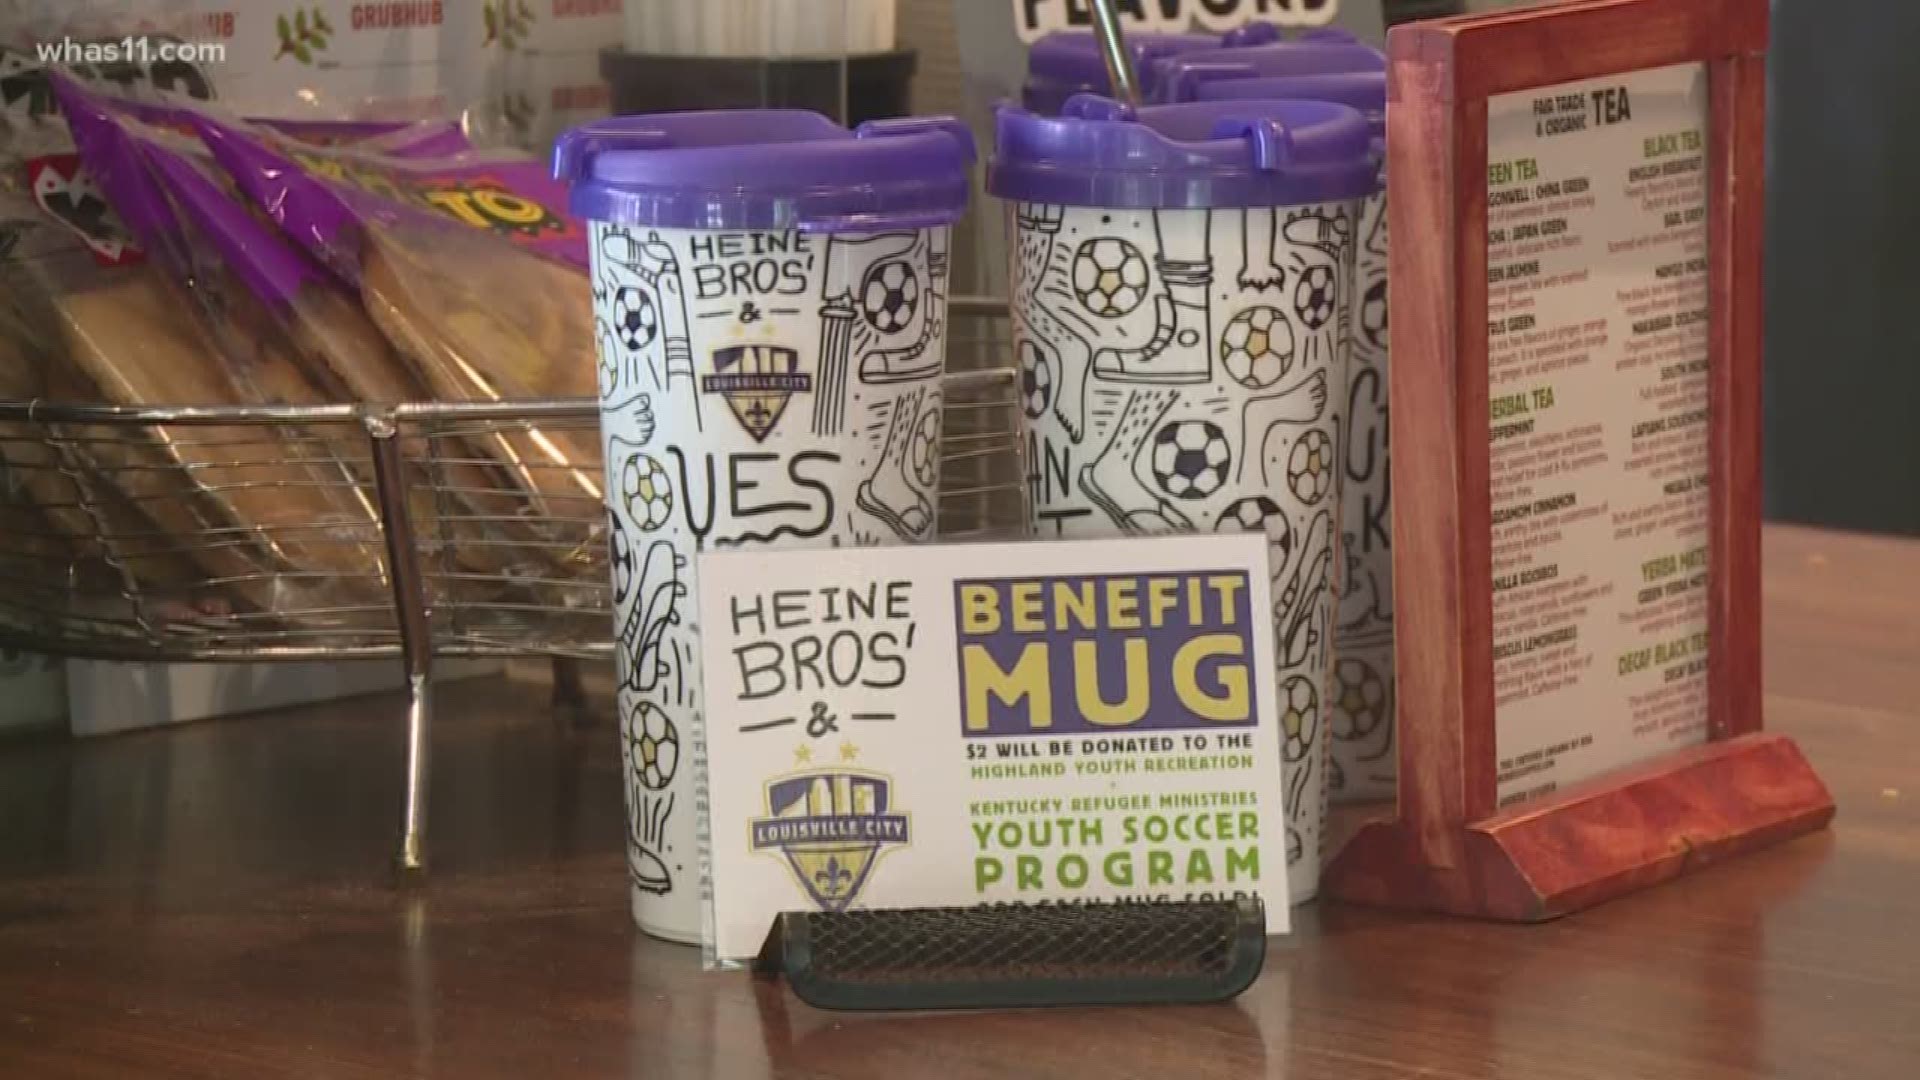 Louisville City FC and Heine Brothers' coffee are partnering to raise money to help the Kentucky Refugee Ministries recreational soccer program.